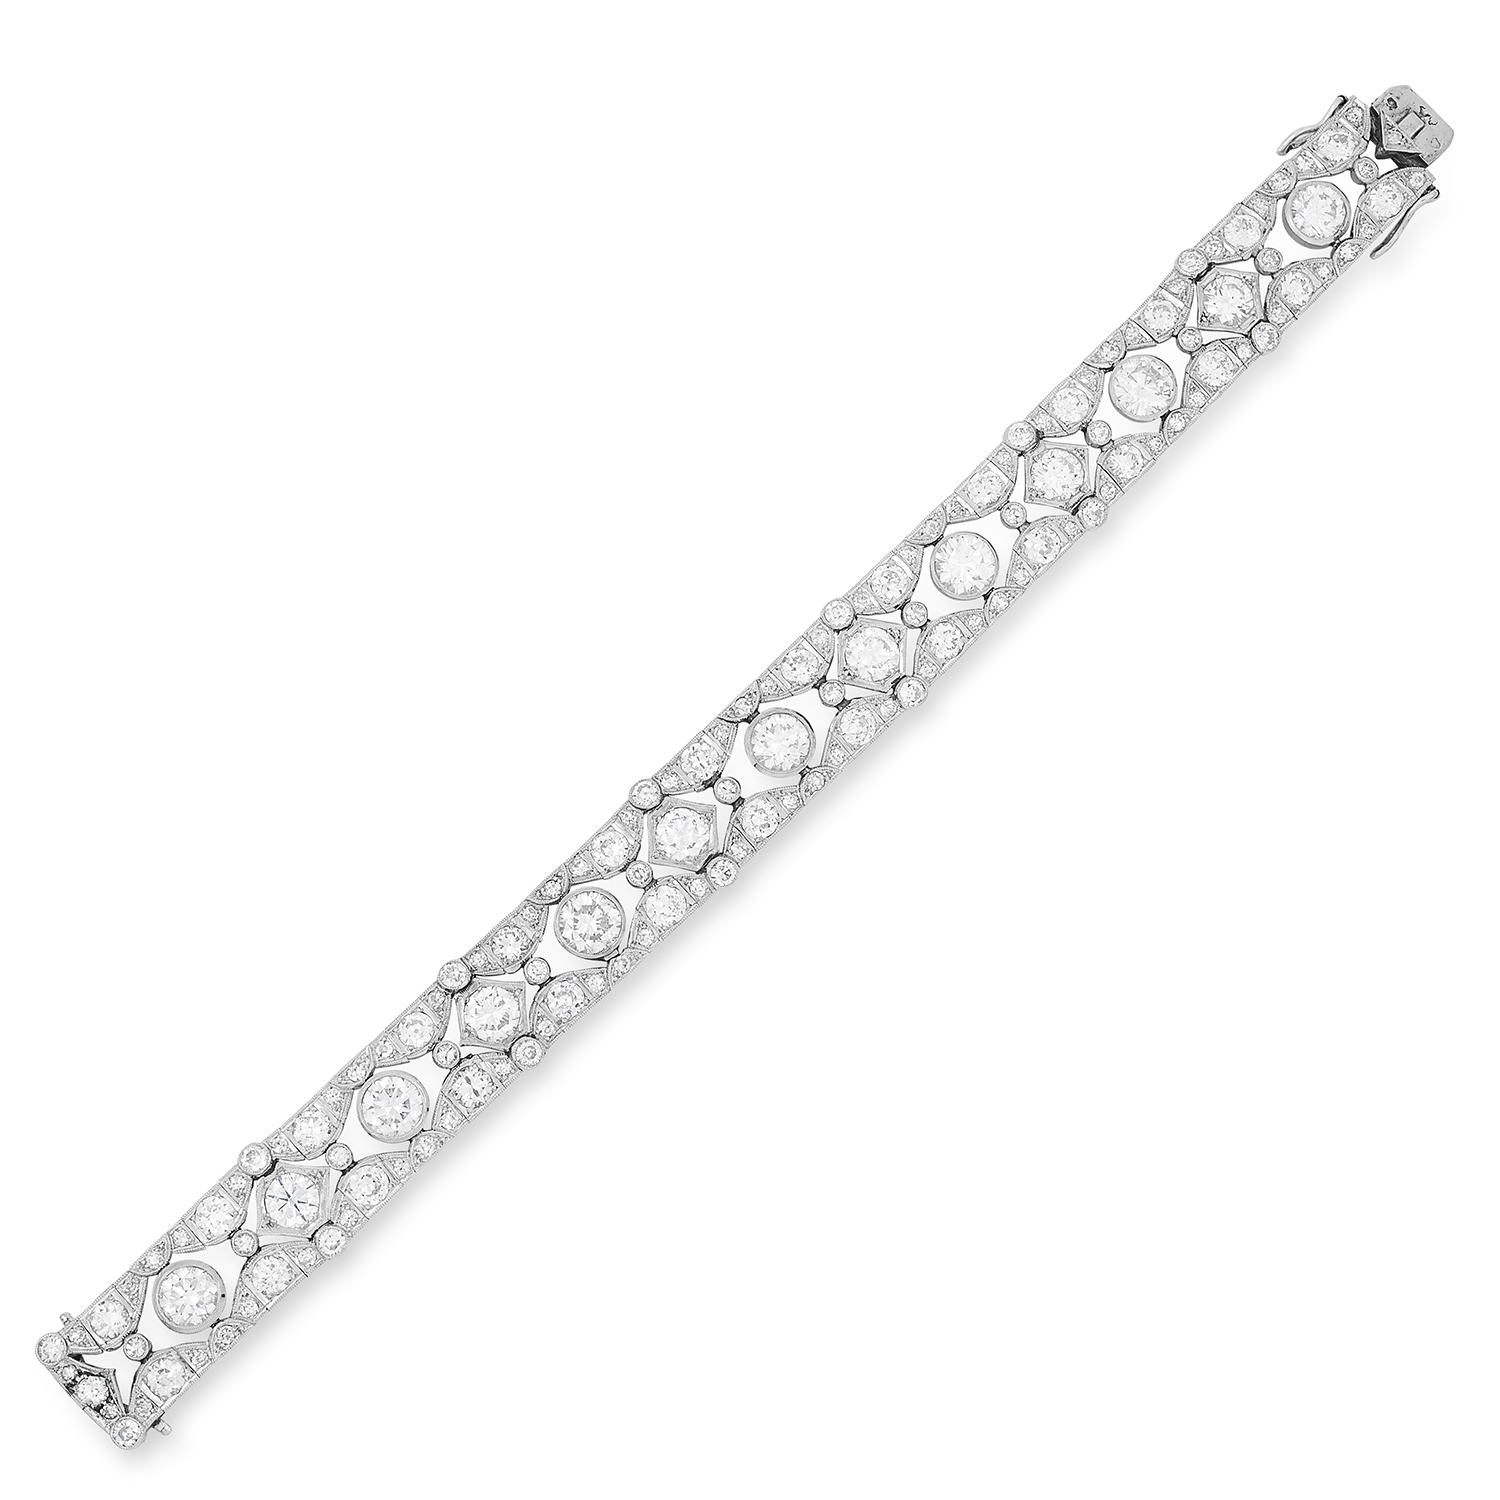 ANTIQUE ART DECO DIAMOND BRACELET set with round and old cut diamonds totalling approximately 17.